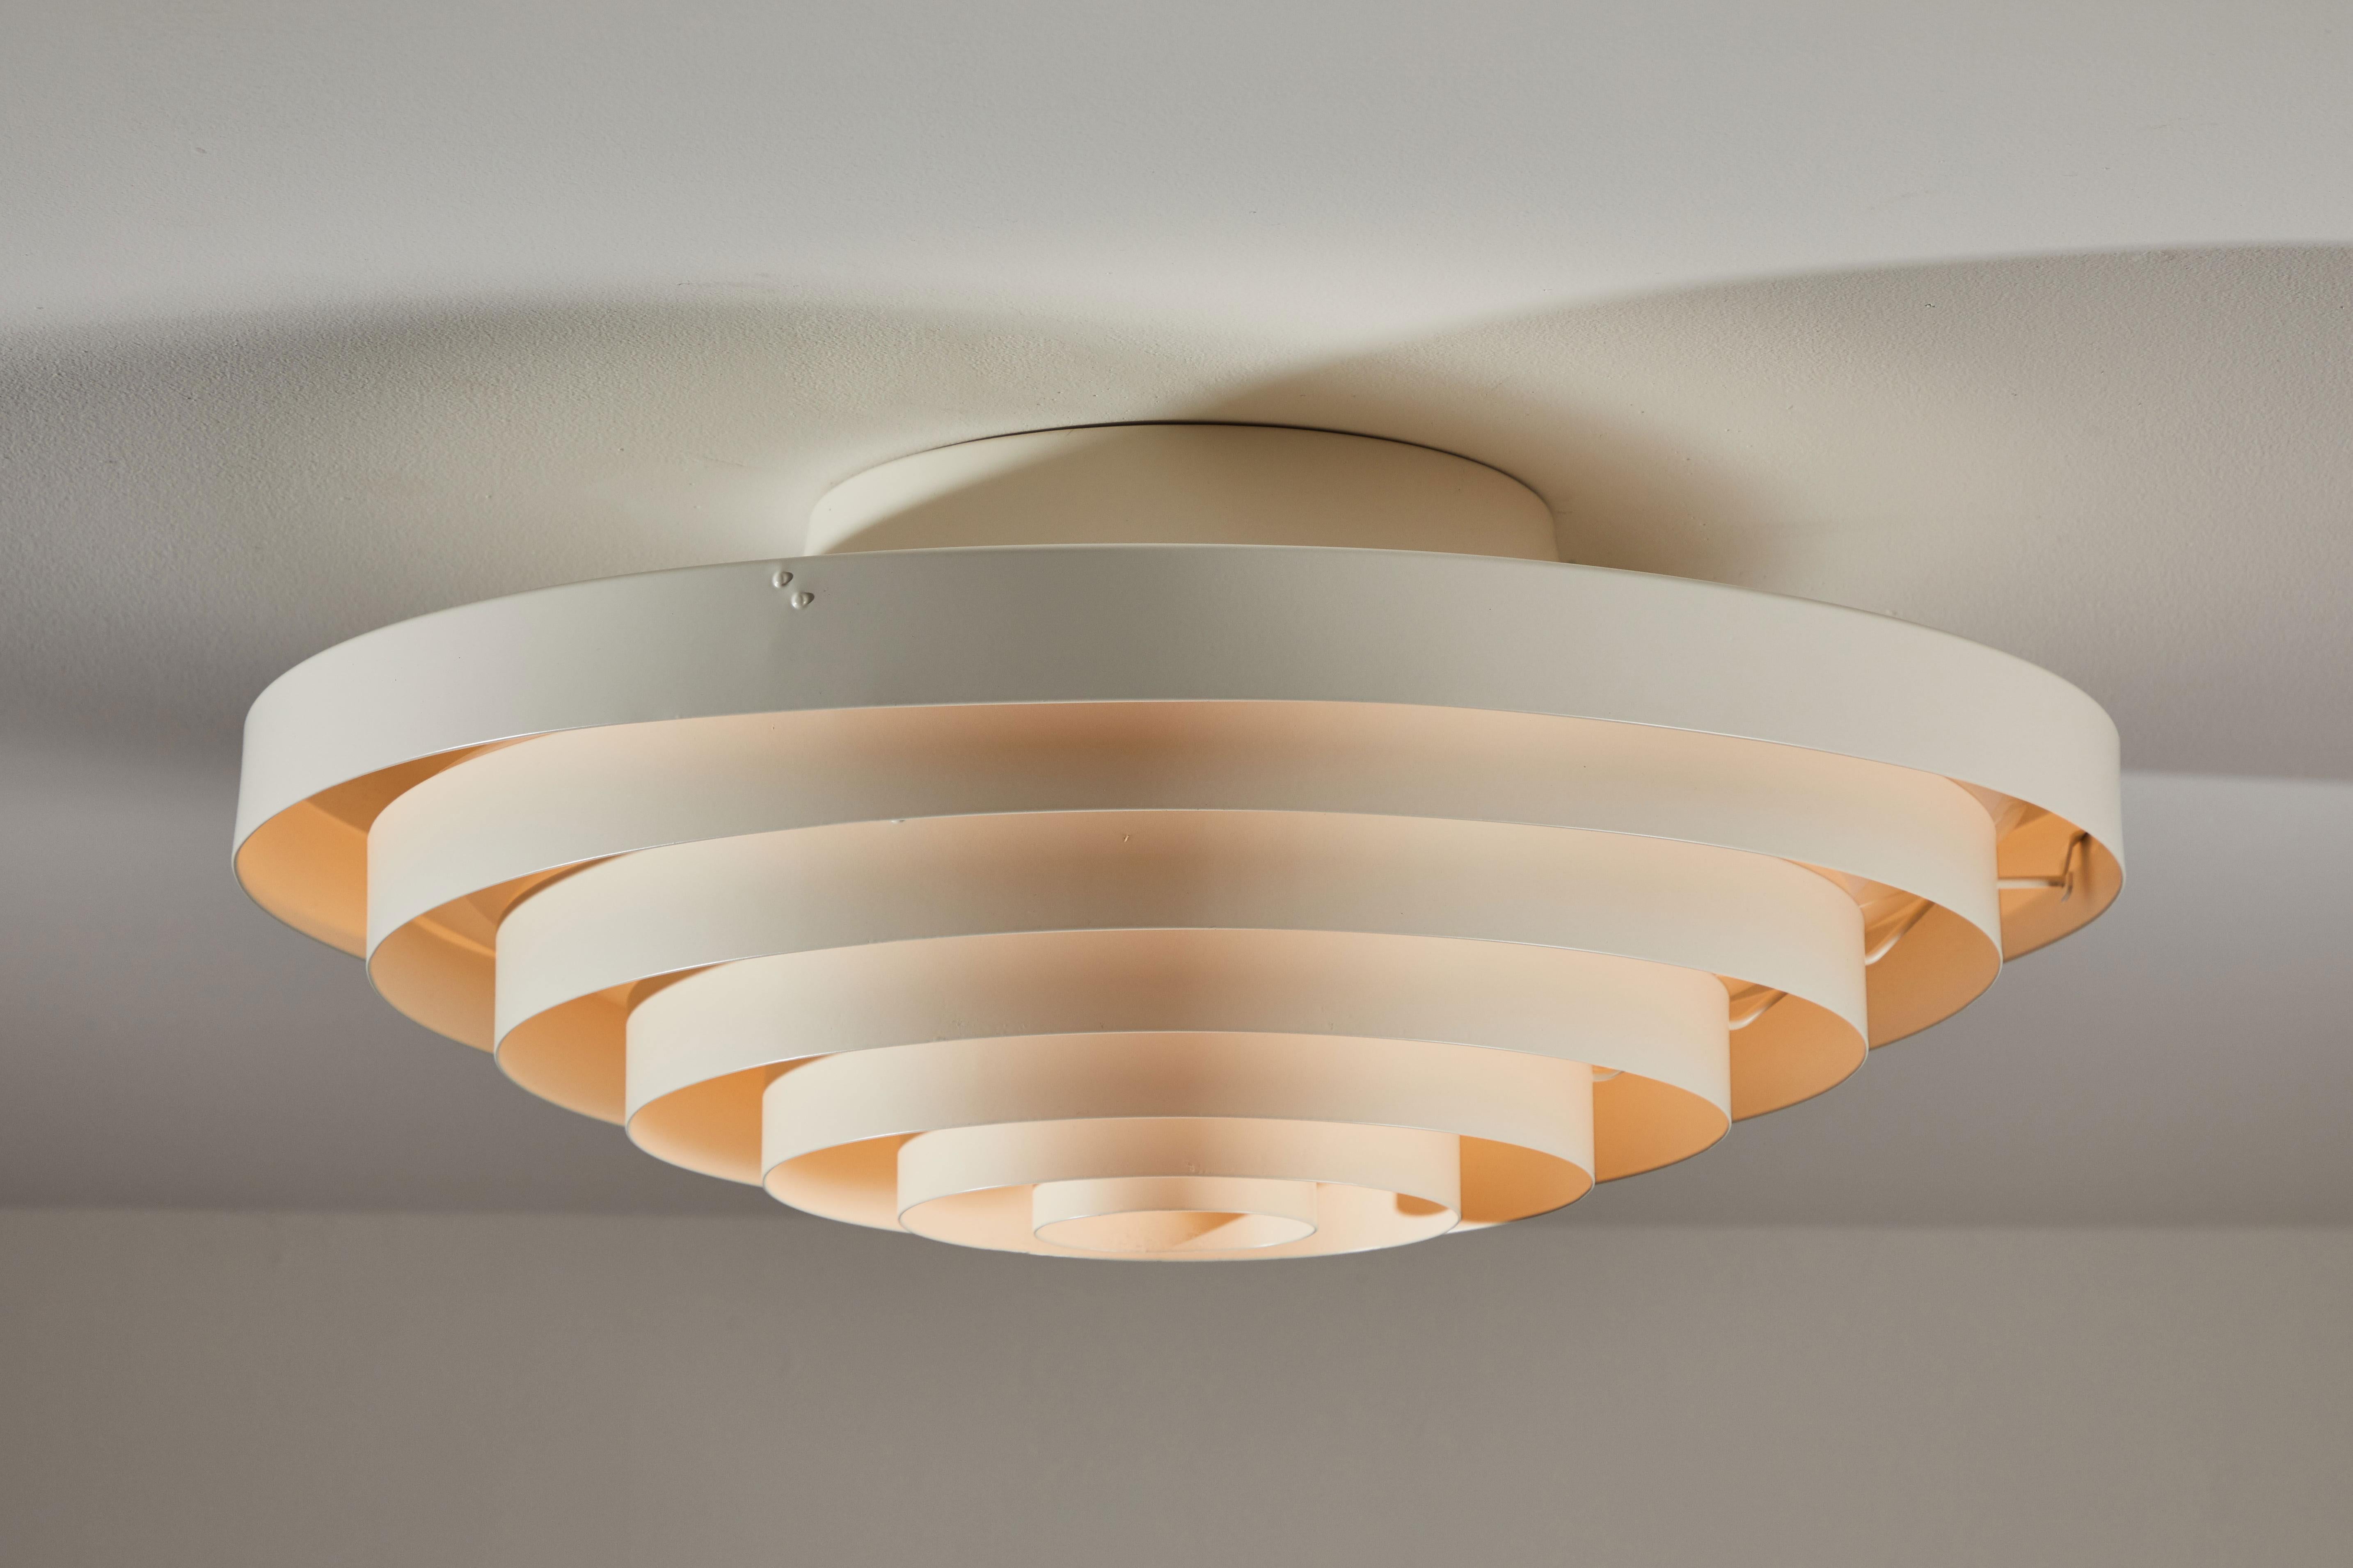 Mid-20th Century Two Flush Mount Ceiling Lights by Lisa Johansson-Pape for Orno